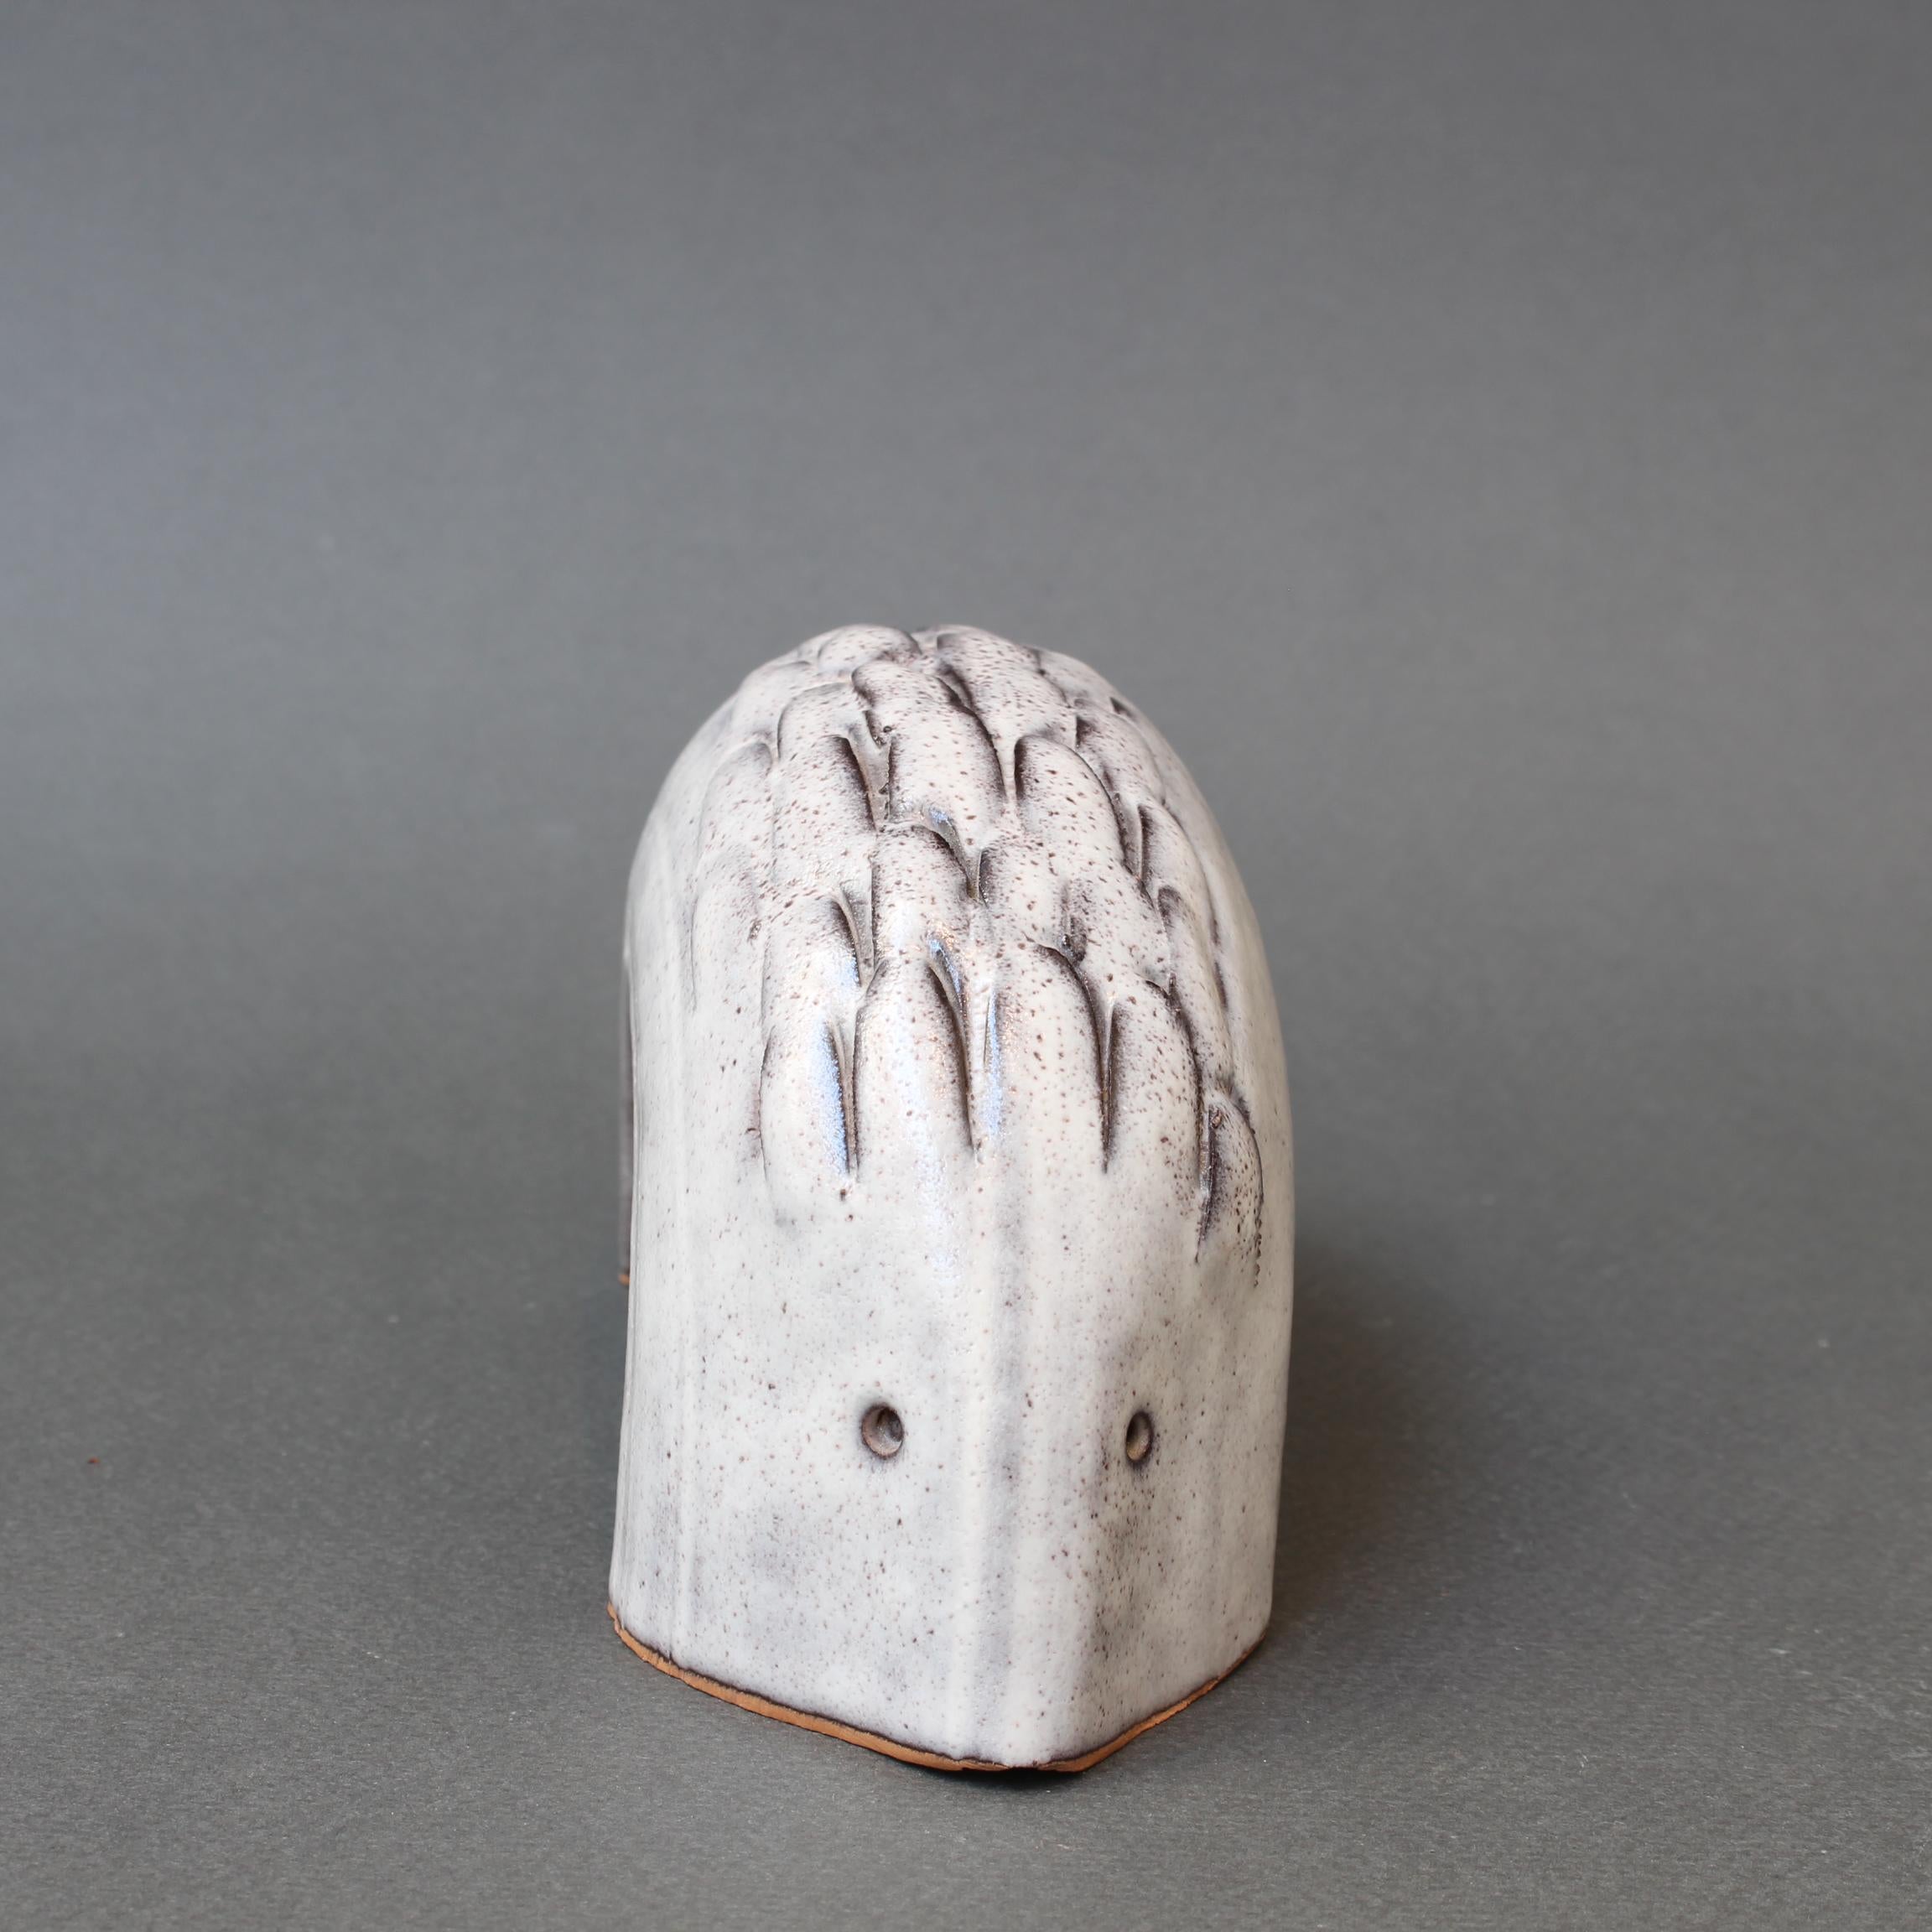 Italian ceramic hedgehog sculpture (circa 1970s) by Alessio Tasca (born 1929). This endearing, minimalist ceramic hedgehog is of the Italian school style most likely inspired by the works of his compatriot, Bruno Gambone. Combining curves,